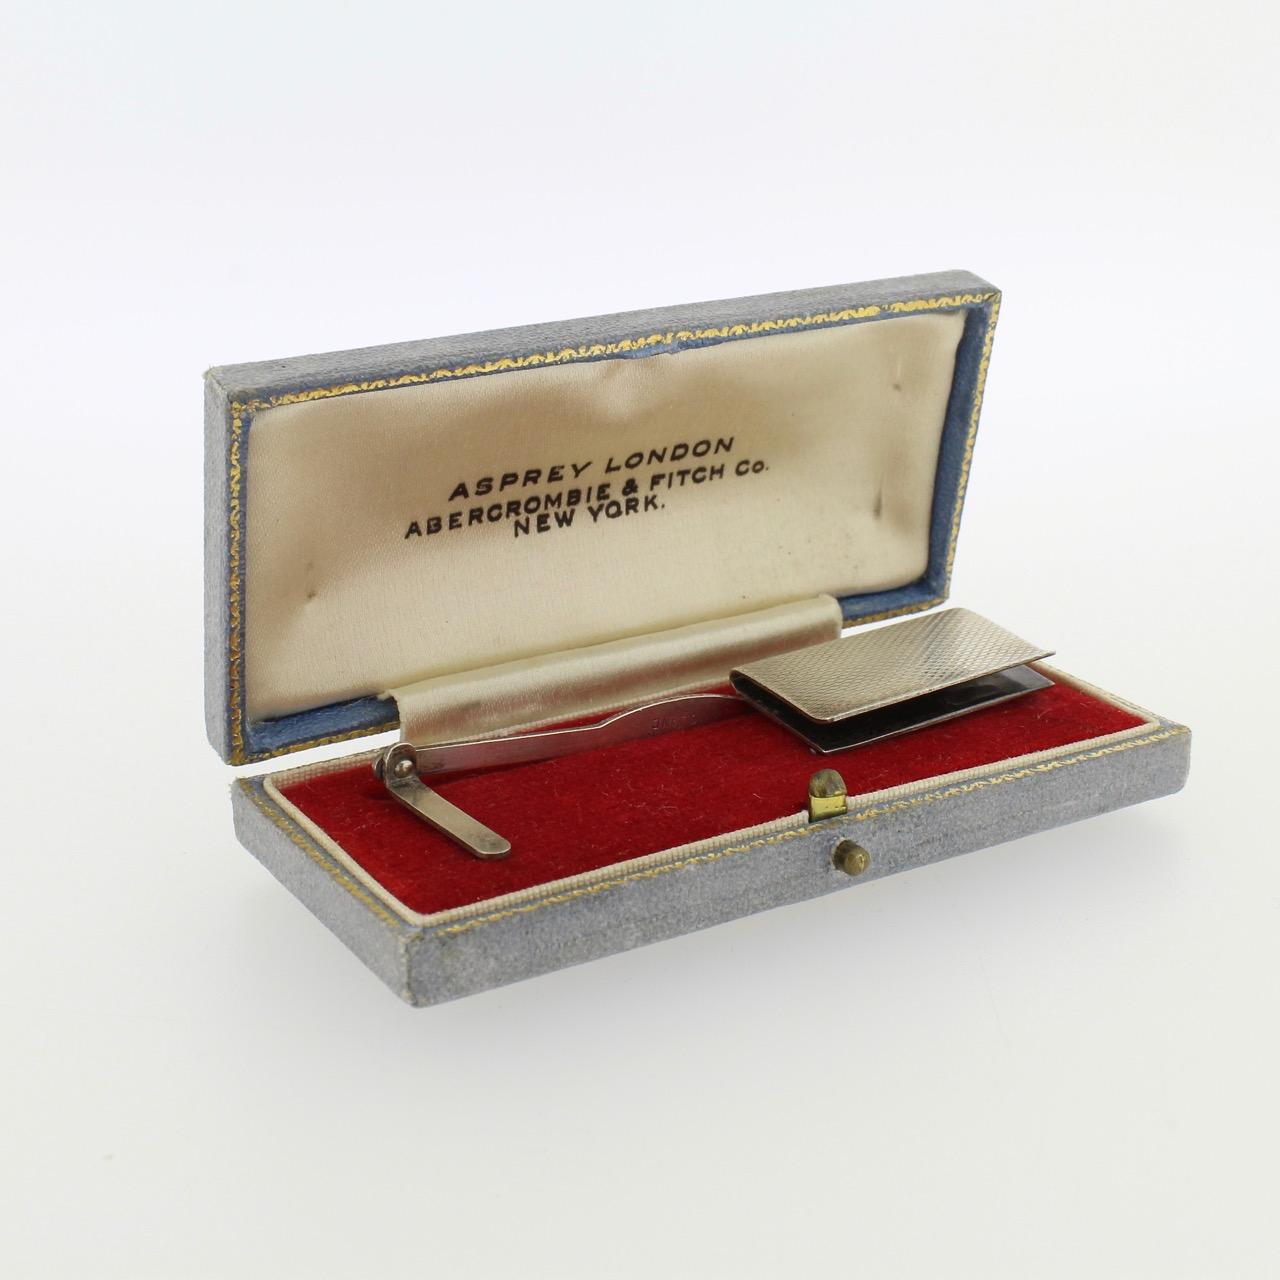 A good Art Deco period sterling silver mechanical bookmark by Asprey & Co.

The bookmark slips over a book cover or group of pages and has a spring action arm that holds its page in place. 

Complete with its original felt lined case (that bears a